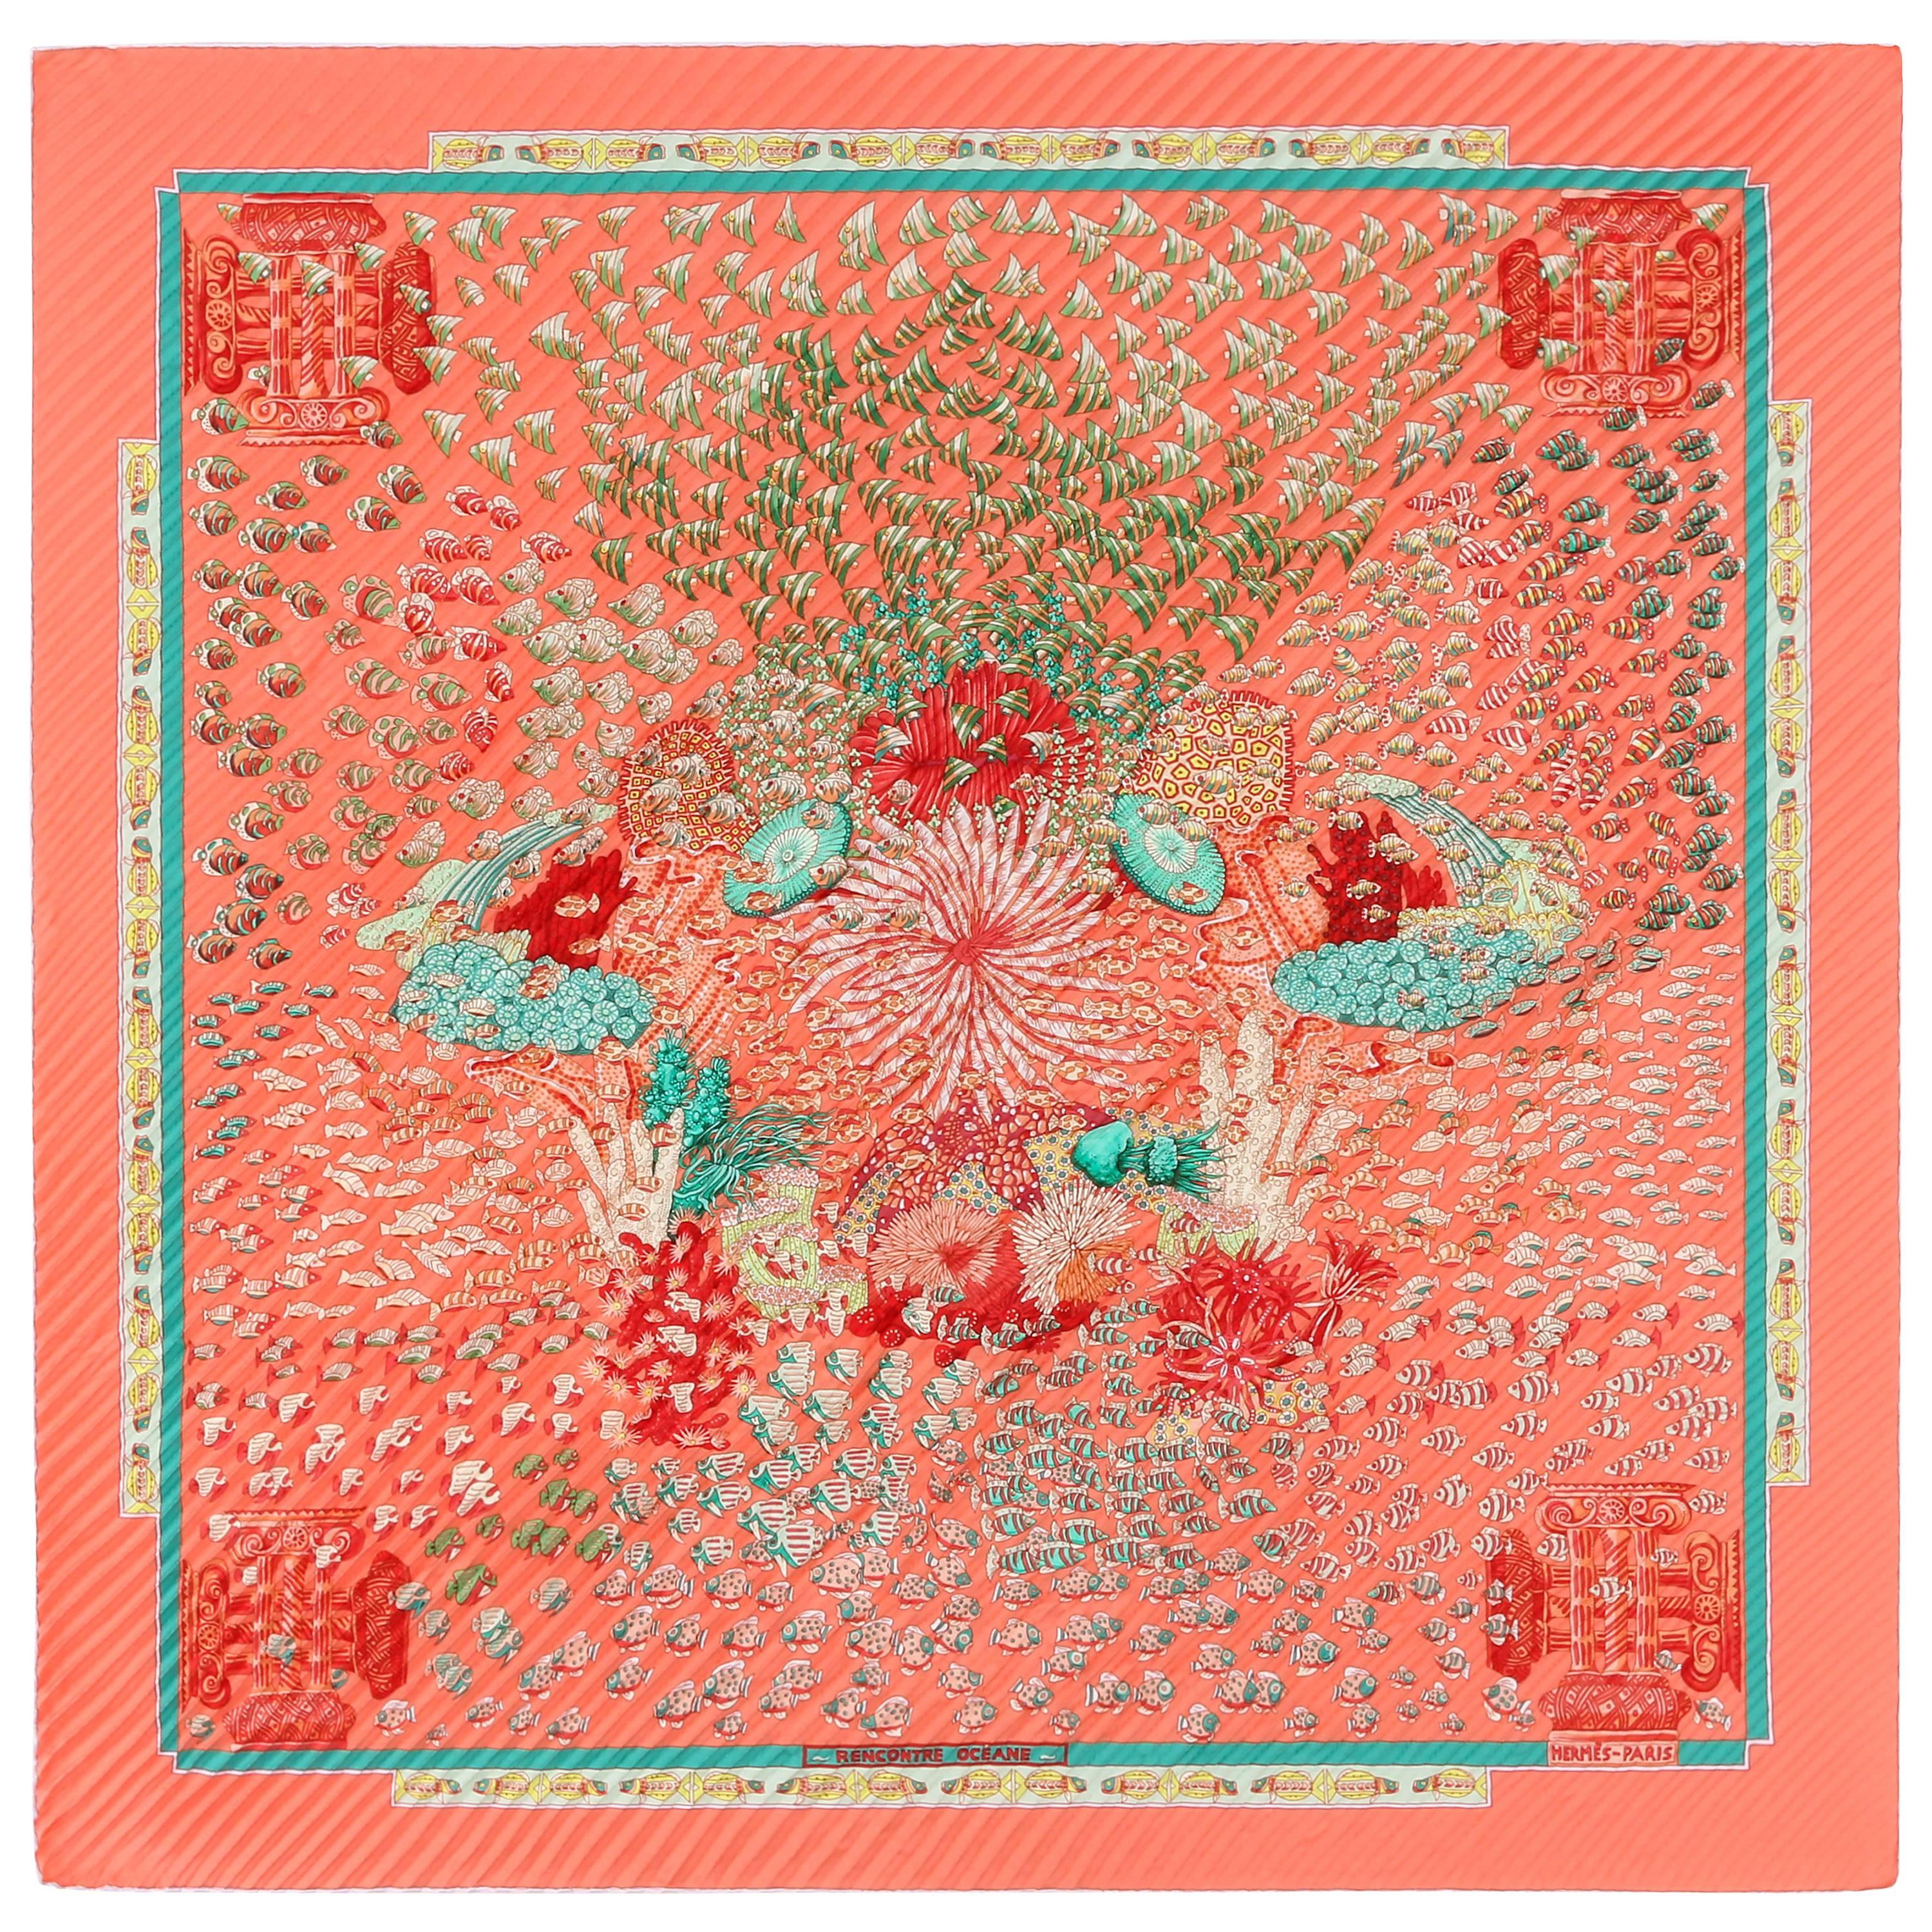 HERMES S/S 2001 Annie Faivre "Rencontre Oceane" Coral Reef Pleated Silk Scarf